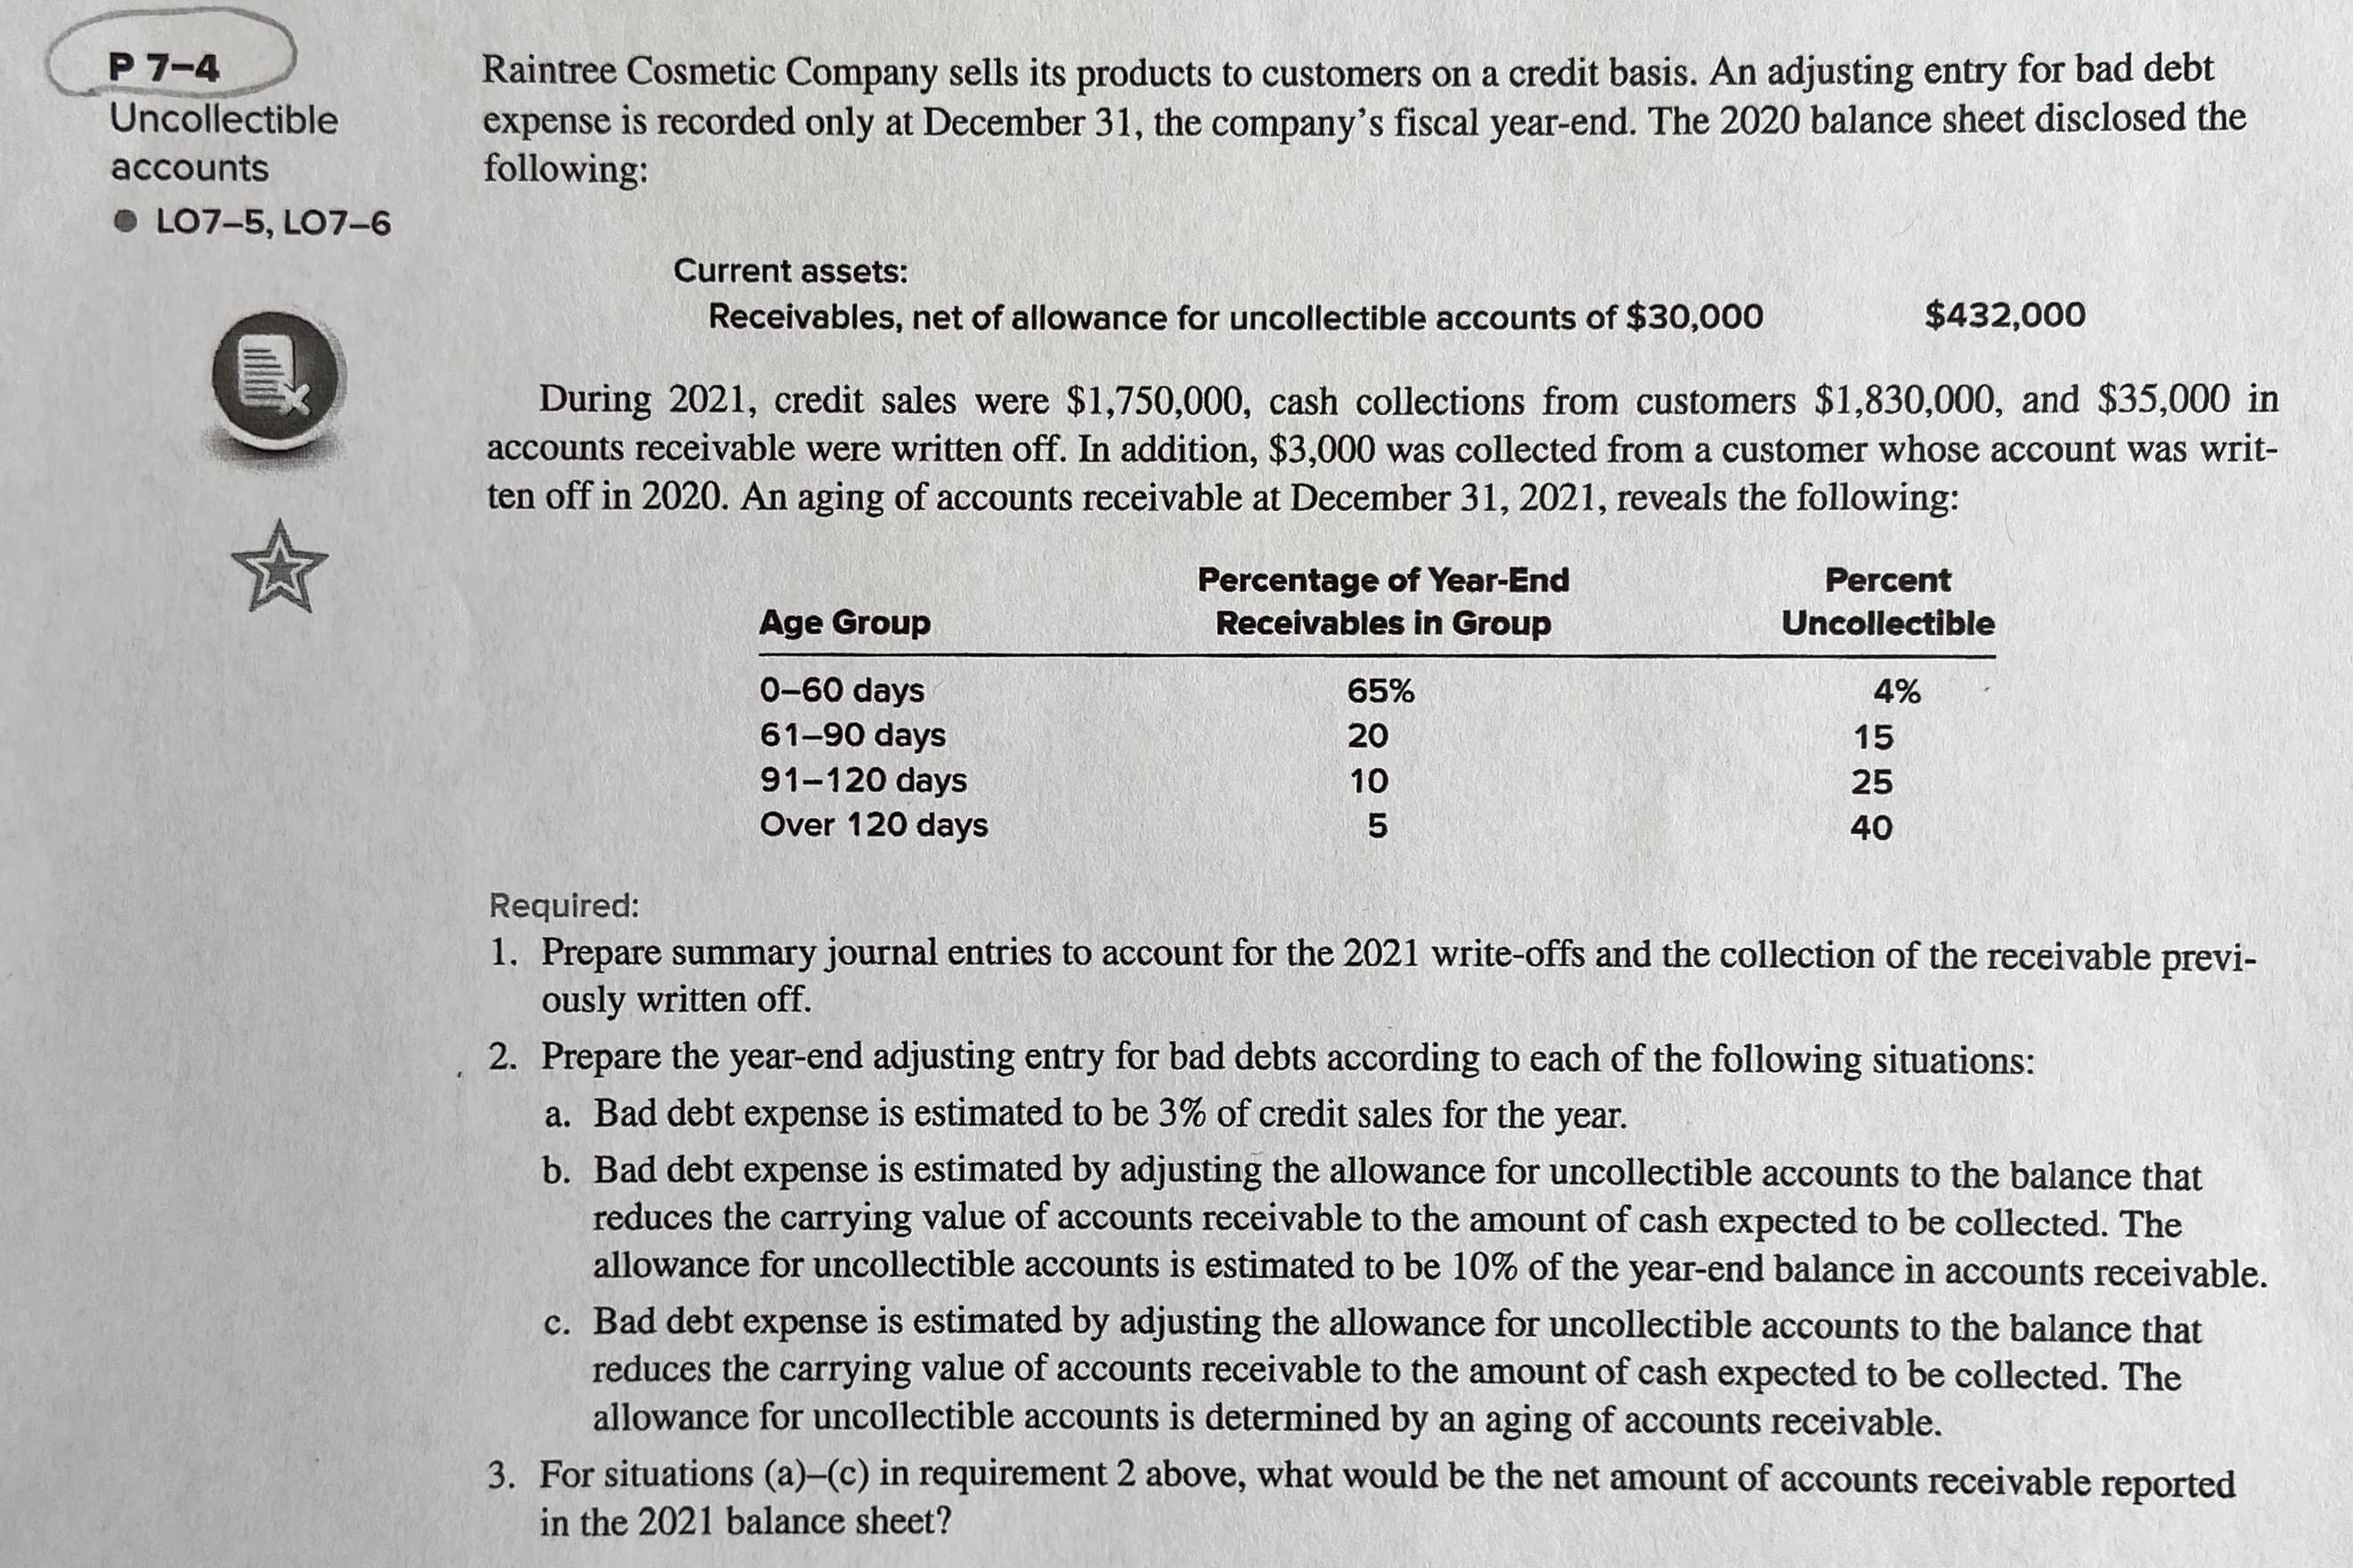 P 7-4
Raintree Cosmetic Company sells its products to customers on a credit basis. An adjusting entry for bad debt
expense is recorded only at December 31, the company's fiscal year-end. The 2020 balance sheet disclosed the
following:
Uncollectible
accounts
• LO7-5, LO7-6
Current assets:
$432,000
Receivables, net of allowance for uncollectible accounts of $30,000
During 2021, credit sales were $1,750,000, cash collections from customers $1,830,000, and $35,000 in
accounts receivable were written off. In addition, $3,000 was collected from a customer whose account was writ-
ten off in 2020. An aging of accounts receivable at December 31, 2021, reveals the following:
Percentage of Year-End
Receivables in Group
Percent
Age Group
Uncollectible
0-60 days
65%
4%
61-90 days
91-120 days
Over 120 days
15
10
25
40
Required:
1. Prepare summary journal entries to account for the 2021 write-offs and the collection of the receivable previ-
ously written off.
2. Prepare the year-end adjusting entry for bad debts according to each of the following situations:
a. Bad debt expense is estimated to be 3% of credit sales for the year.
b. Bad debt expense is estimated by adjusting the allowance for uncollectible accounts to the balance that
reduces the carrying value of accounts receivable to the amount of cash expected to be collected. The
allowance for uncollectible accounts is estimated to be 10% of the year-end balance in accounts receivable.
c. Bad debt expense is estimated by adjusting the allowance for uncollectible accounts to the balance that
reduces the carrying value of accounts receivable to the amount of cash expected to be collected. The
allowance for uncollectible accounts is determined by an aging of accounts receivable.
3. For situations (a)-(c) in requirement 2 above, what would be the net amount of accounts receivable reported
in the 2021 balance sheet?
